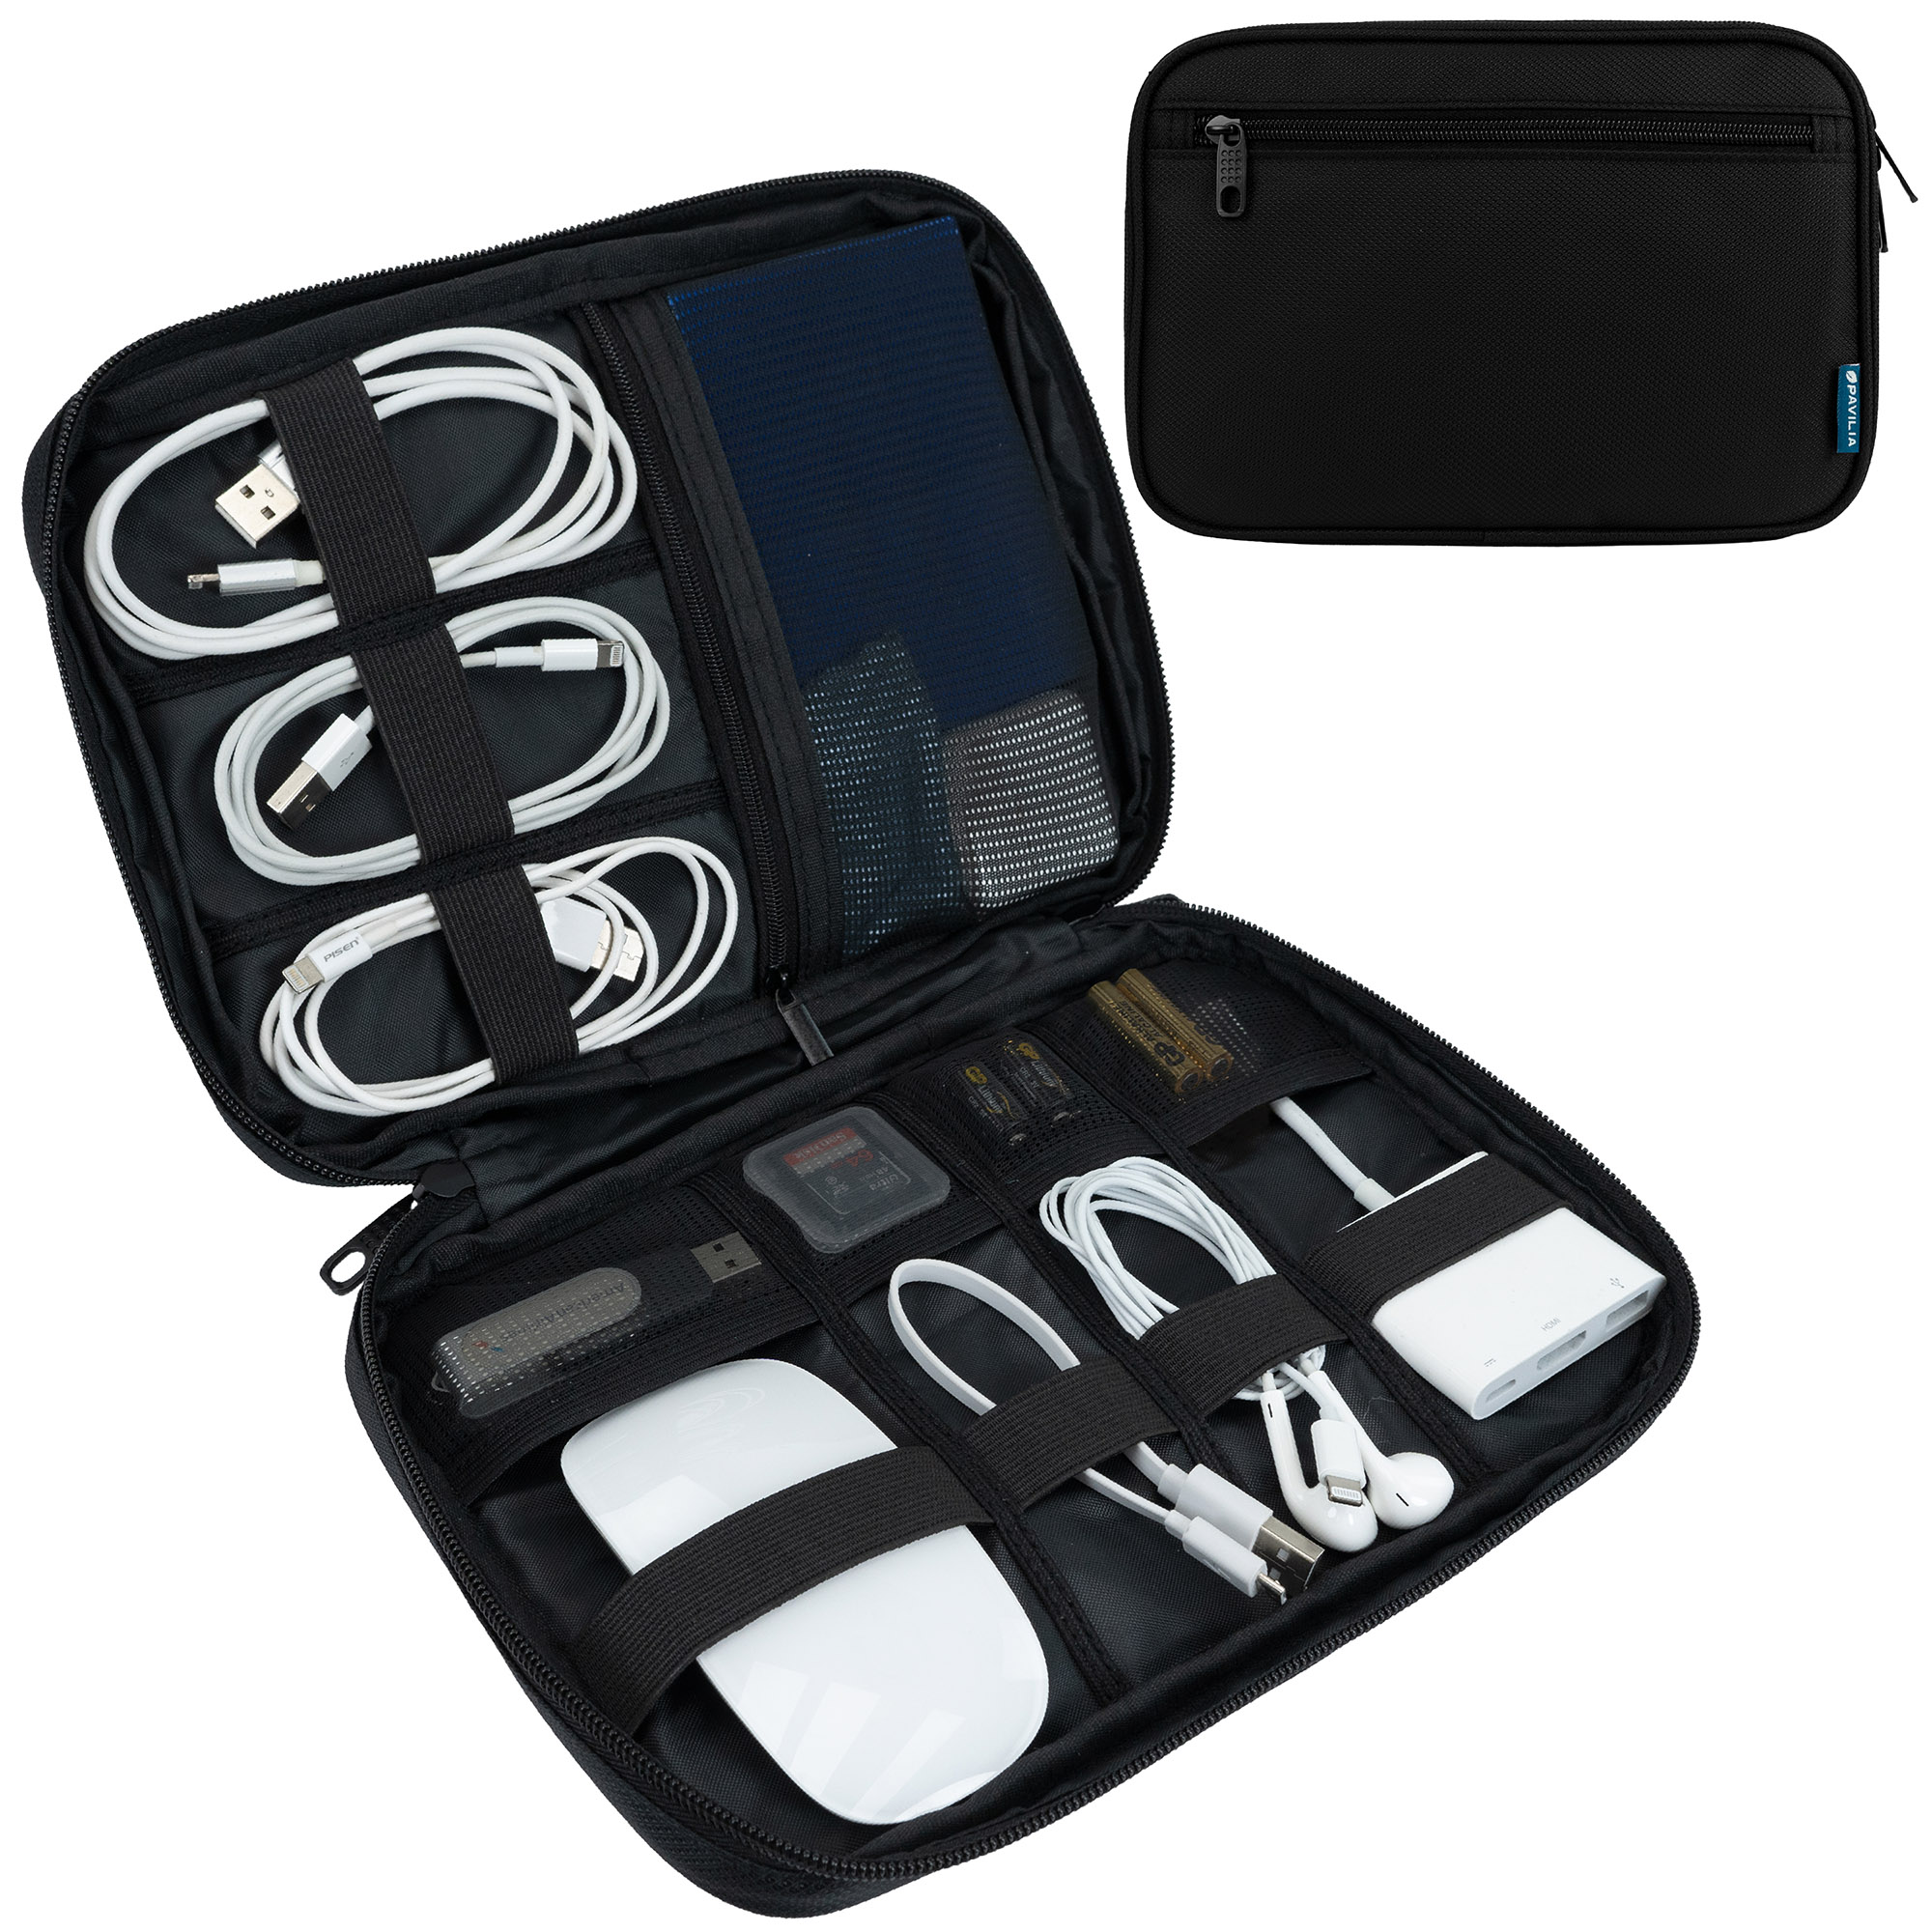  Electronics Travel Organizer-3 Layer Travel Cable Charger  Storage Organizer bag with Shockproof Pokect for Tablet, Cord Organizer Case  with DIY Storage Area,Tech Pounch for Electronic Accessories : Electronics